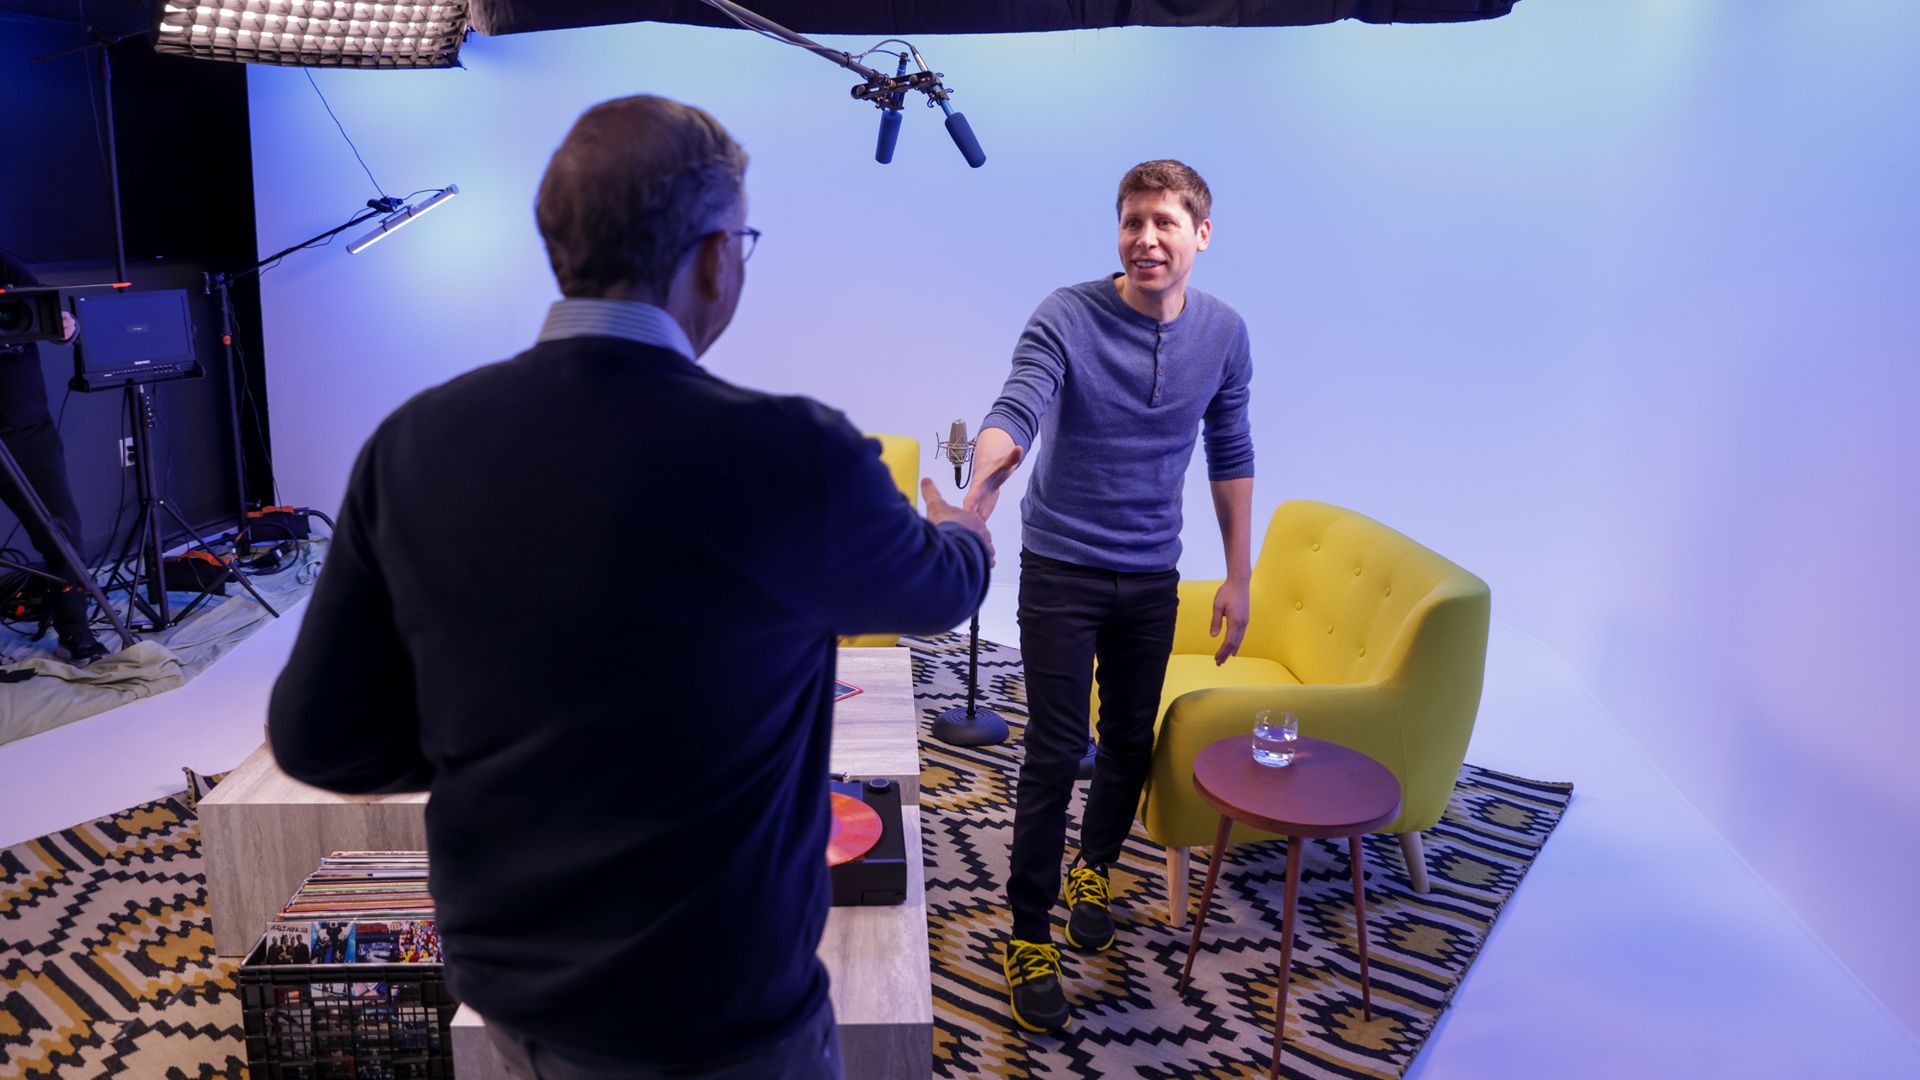 Bill Gates shakes hands with Sam Altman as they record a podcast together.